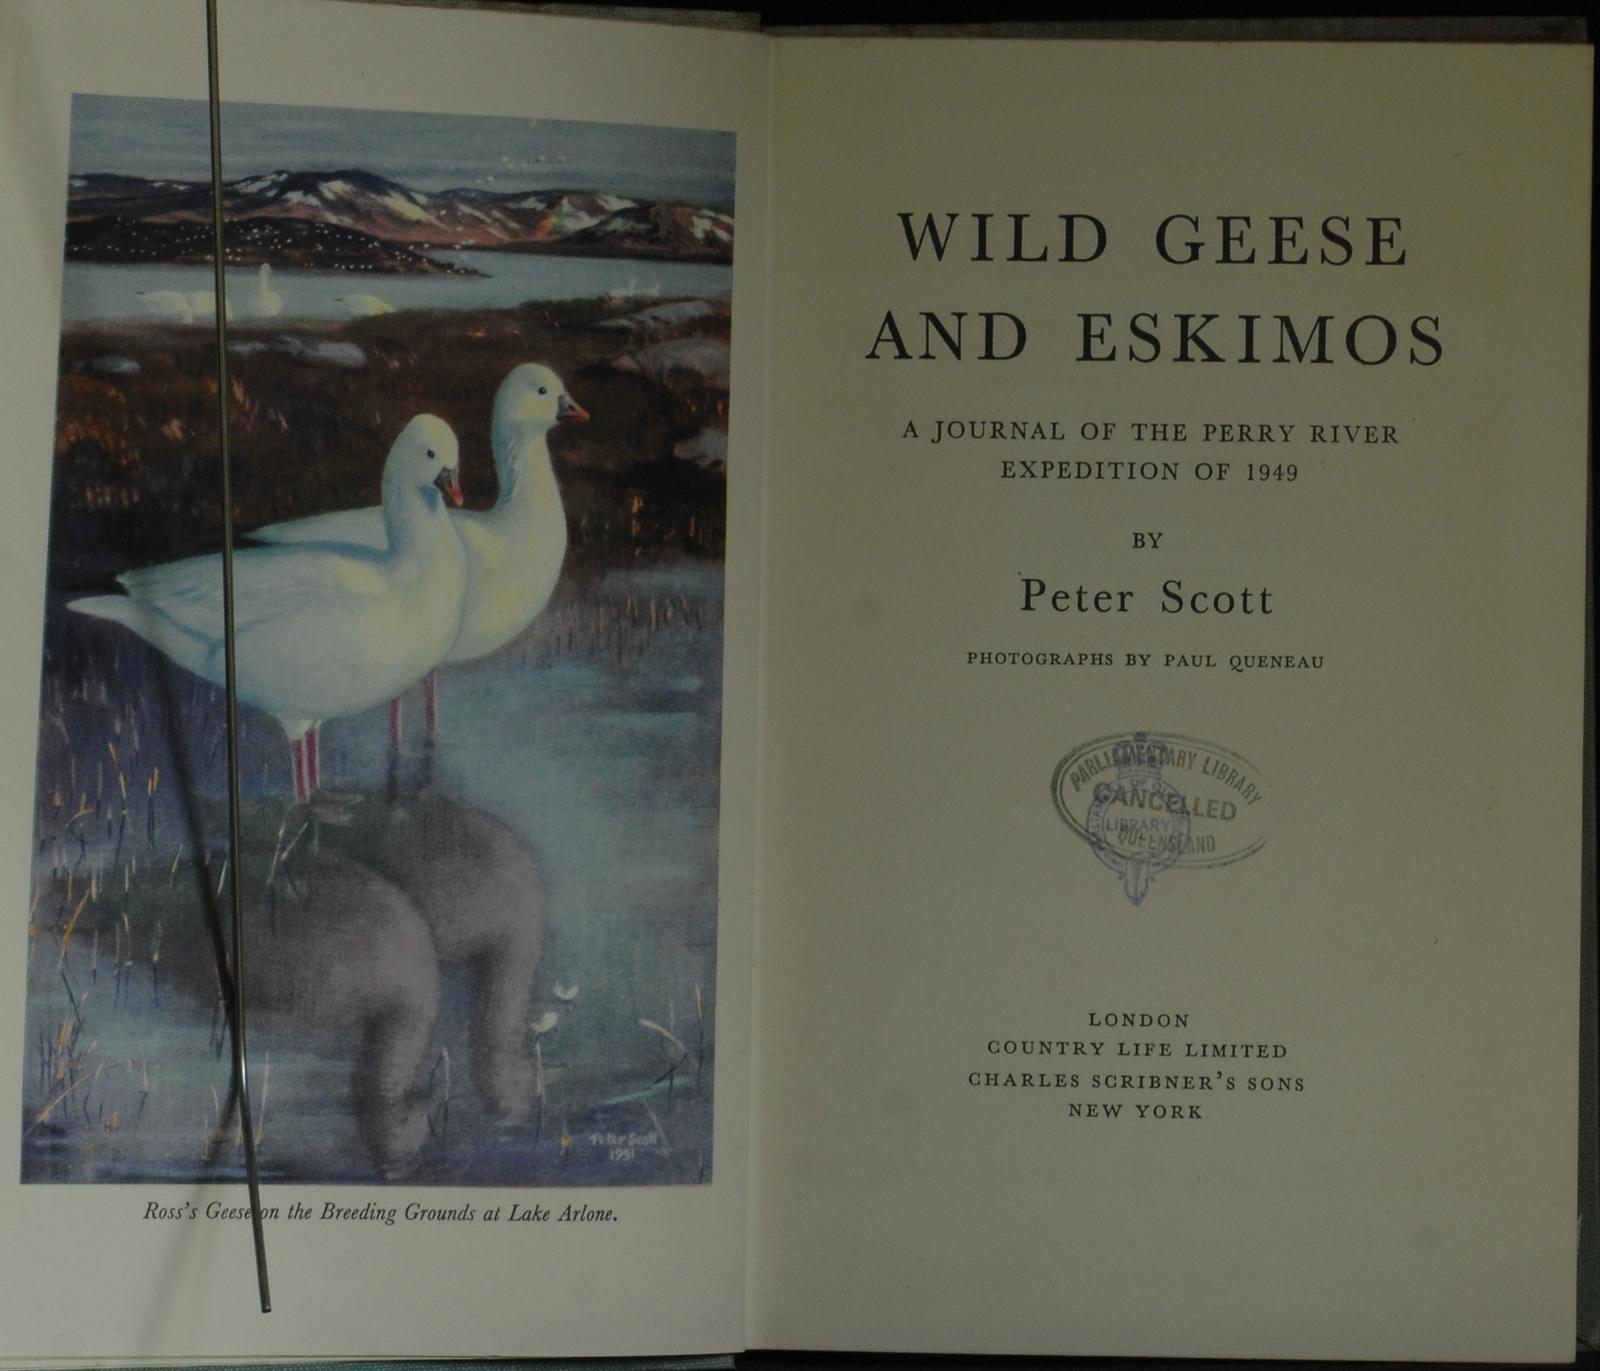 mbb006775c_-_Scott_Peter_-_Wild_Geese_And_Eskimos.A_Journal_Of_The_Perry_River_Expedition_Of_1949_-_Contains_Illustrations.jpg